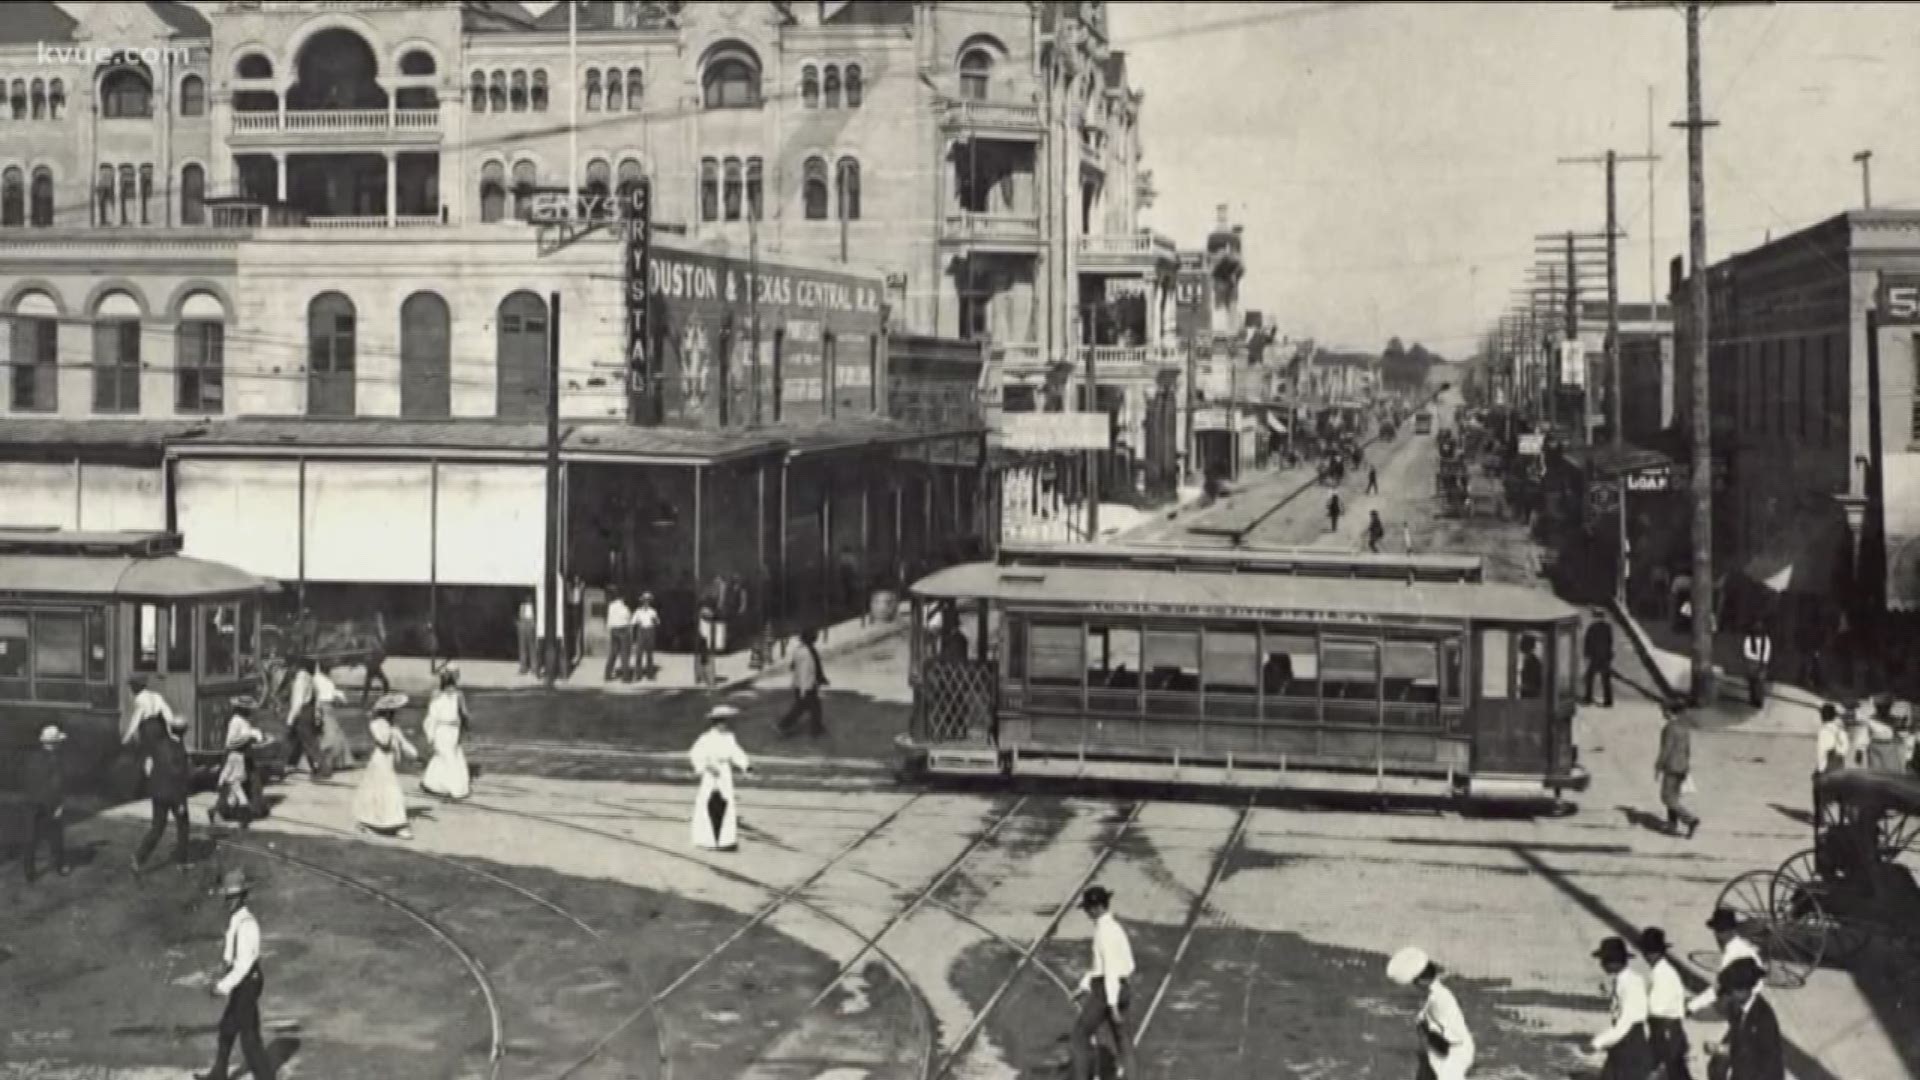 As more people in Central Texas find other ways to get around town, we take a look back at how people used to move in Austin, without cars.